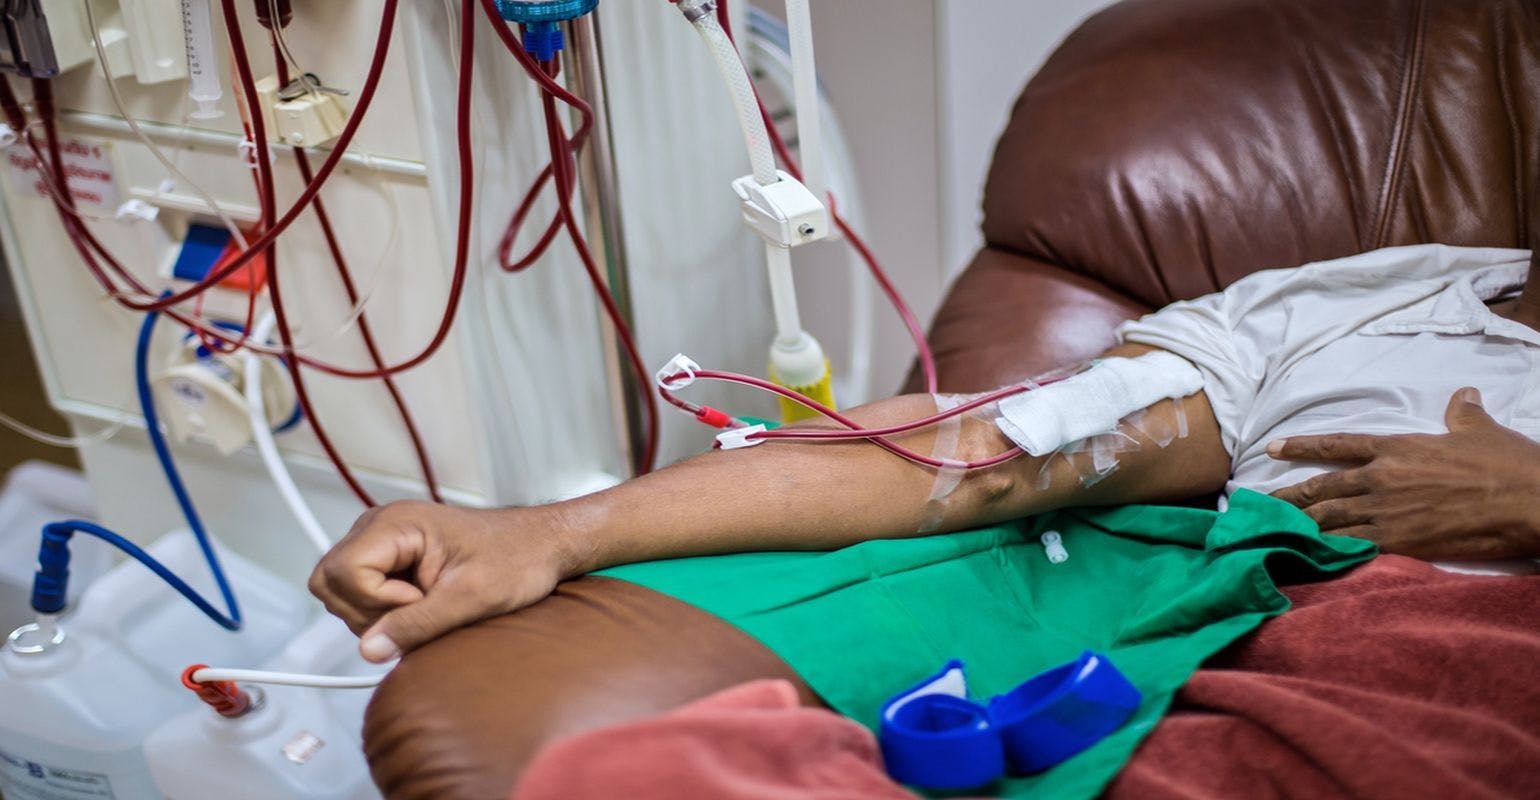 Bloodstream Infection Rates as a Measure of Quality in Hemodialysis Facilities